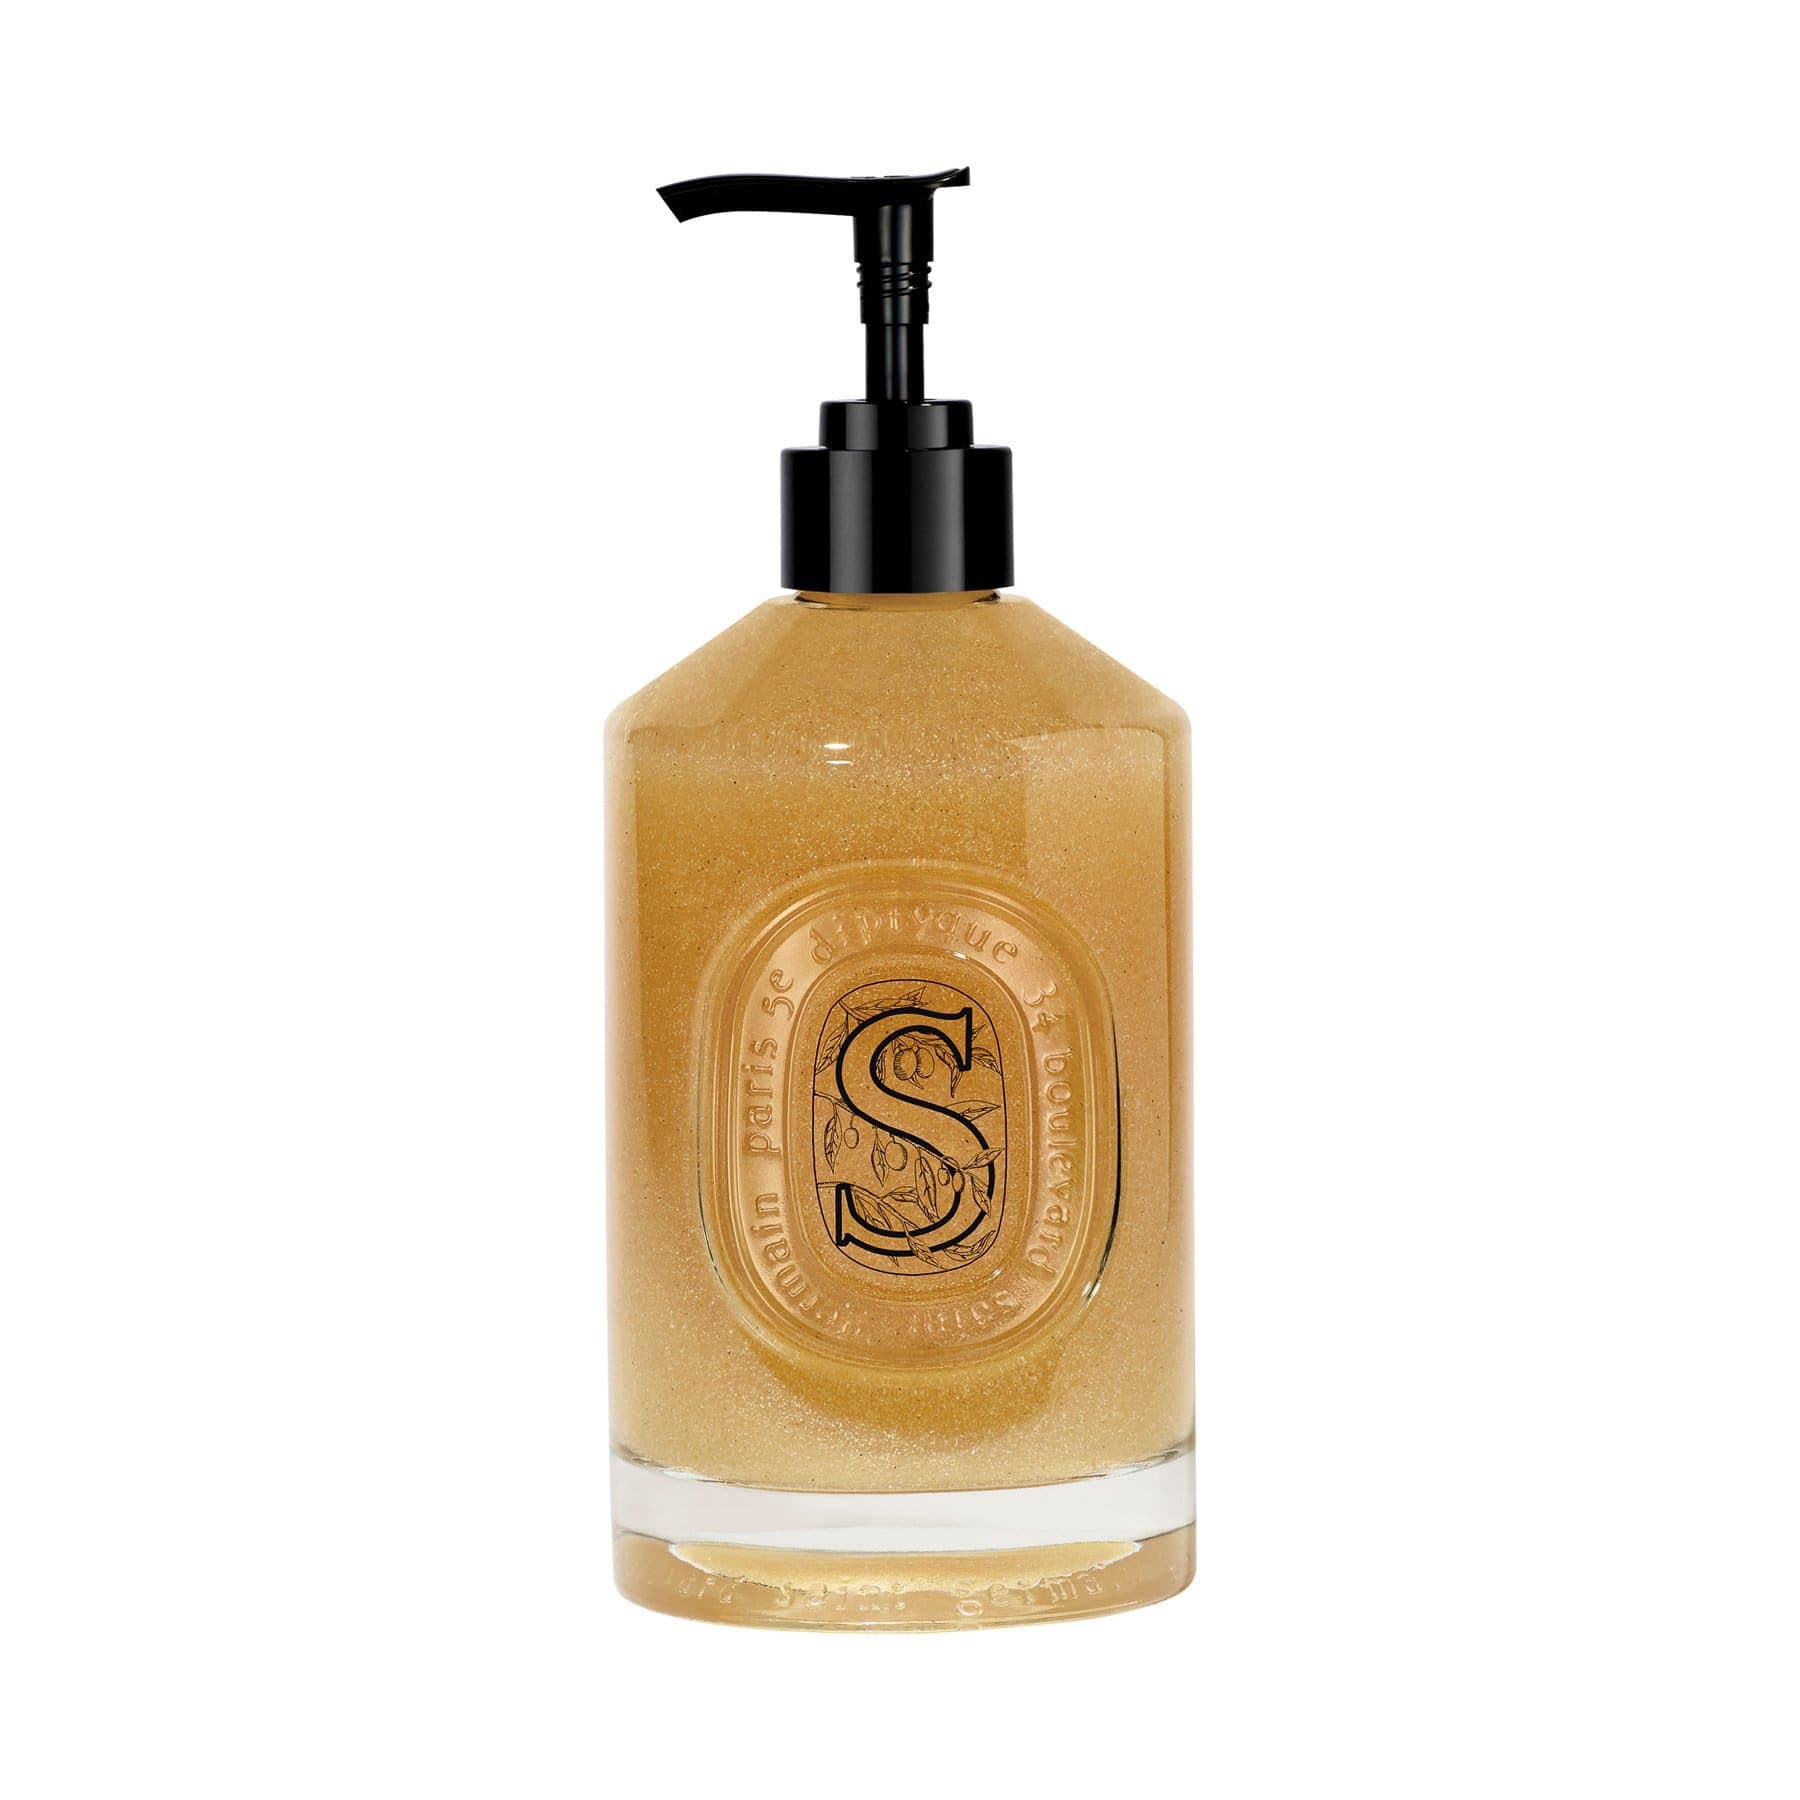 Diptyque exfoliating soap for hands